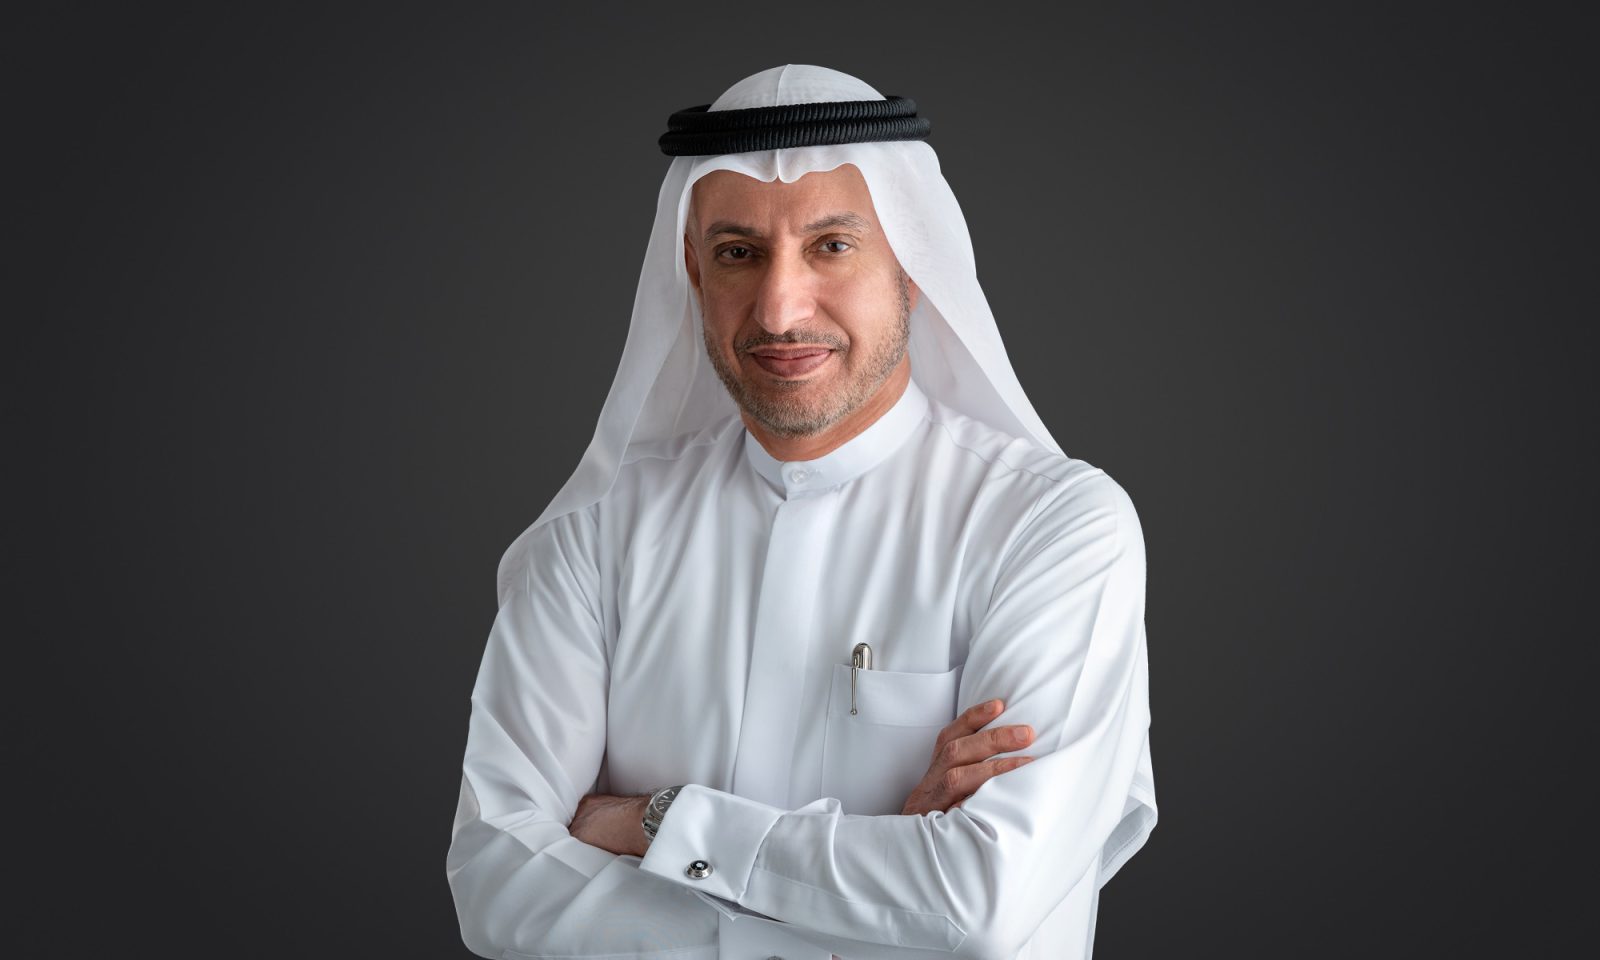 His Excellency Dr. Mohammed Alzarooni Executive Chairman of DIEZ Authority